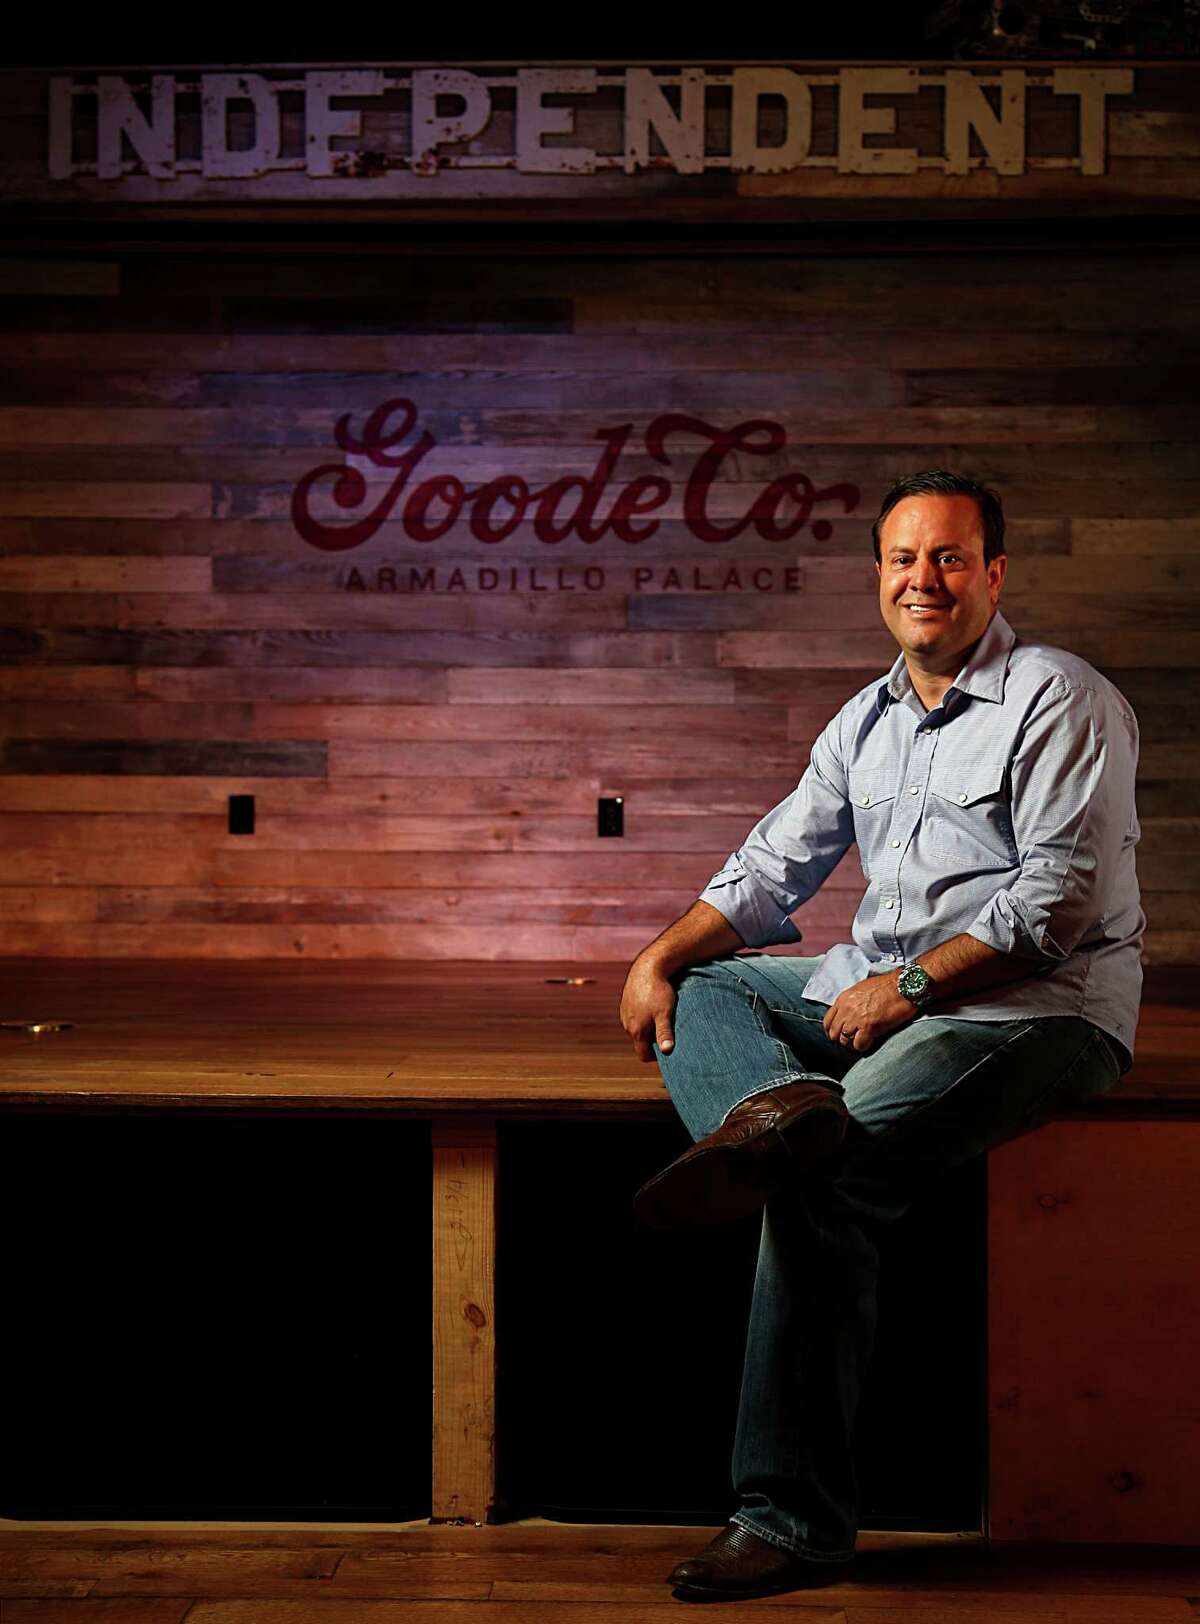 Goode Co. CEO Levi Goode poses for a portrait at Goode Co. Armadillo Palace.